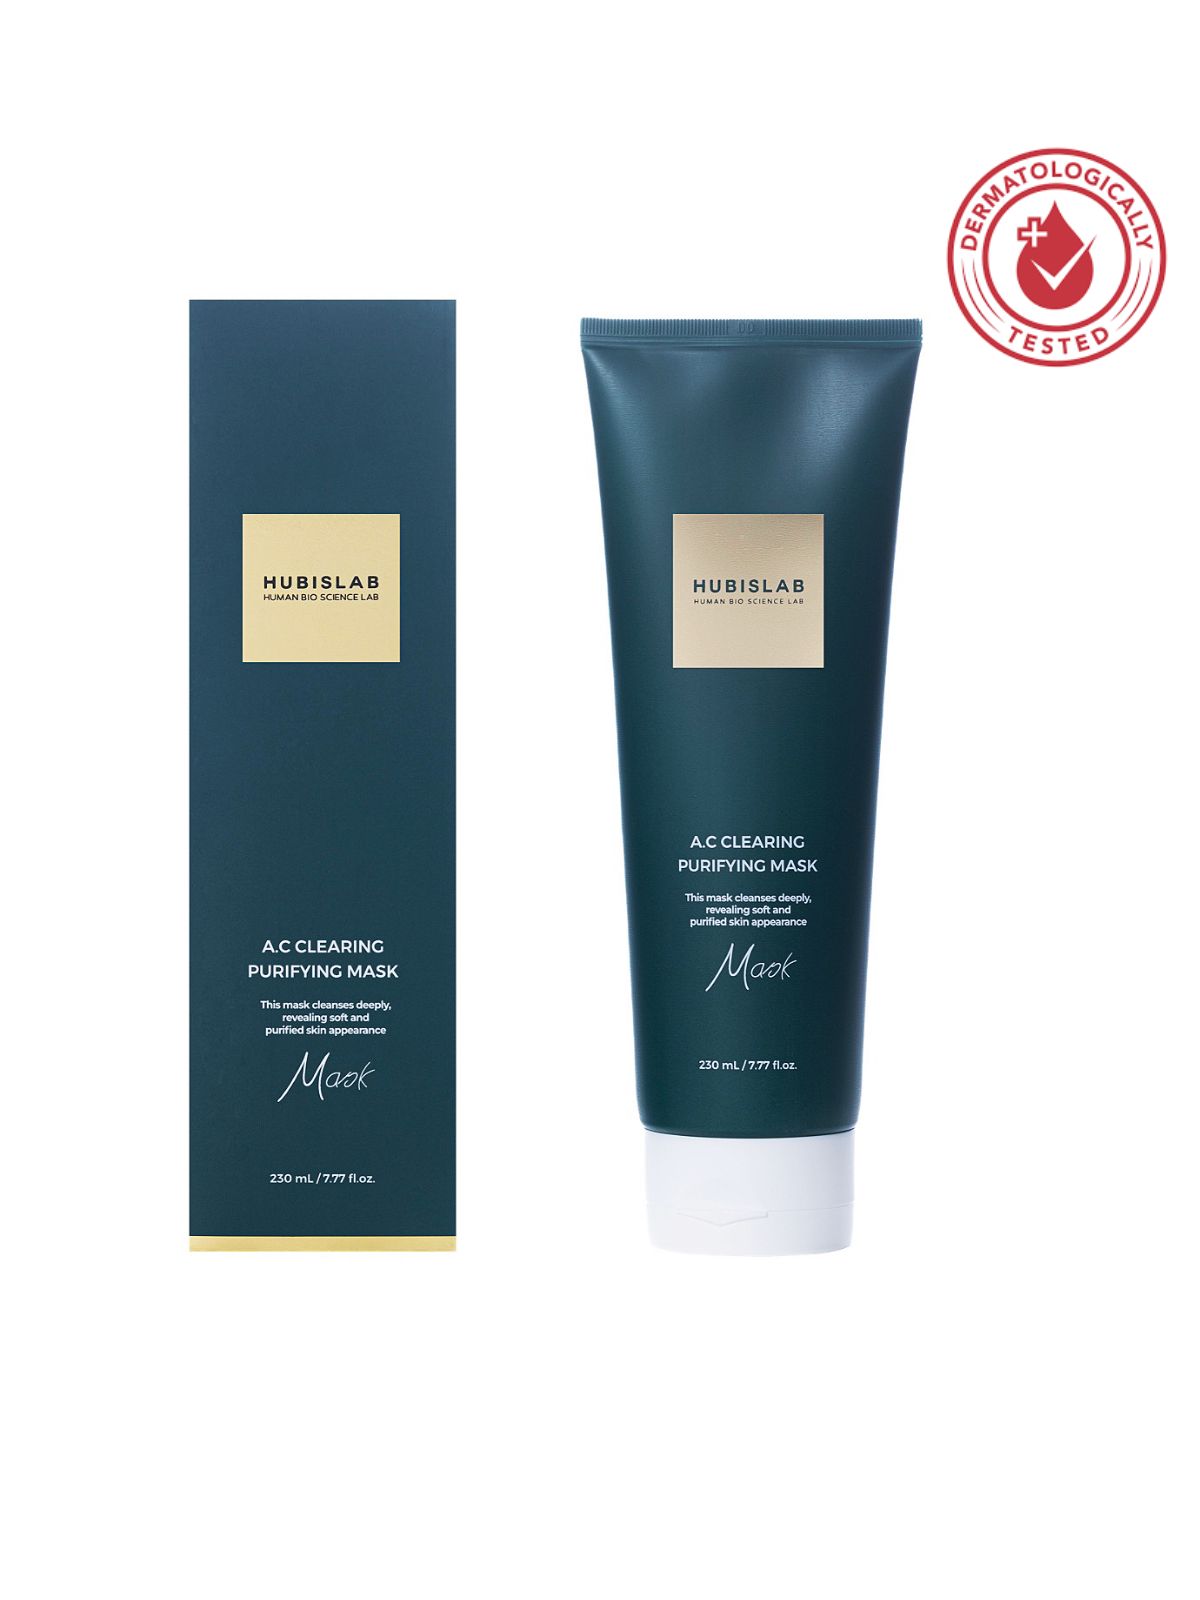 A.C Clearing Purifying Mask 230ml